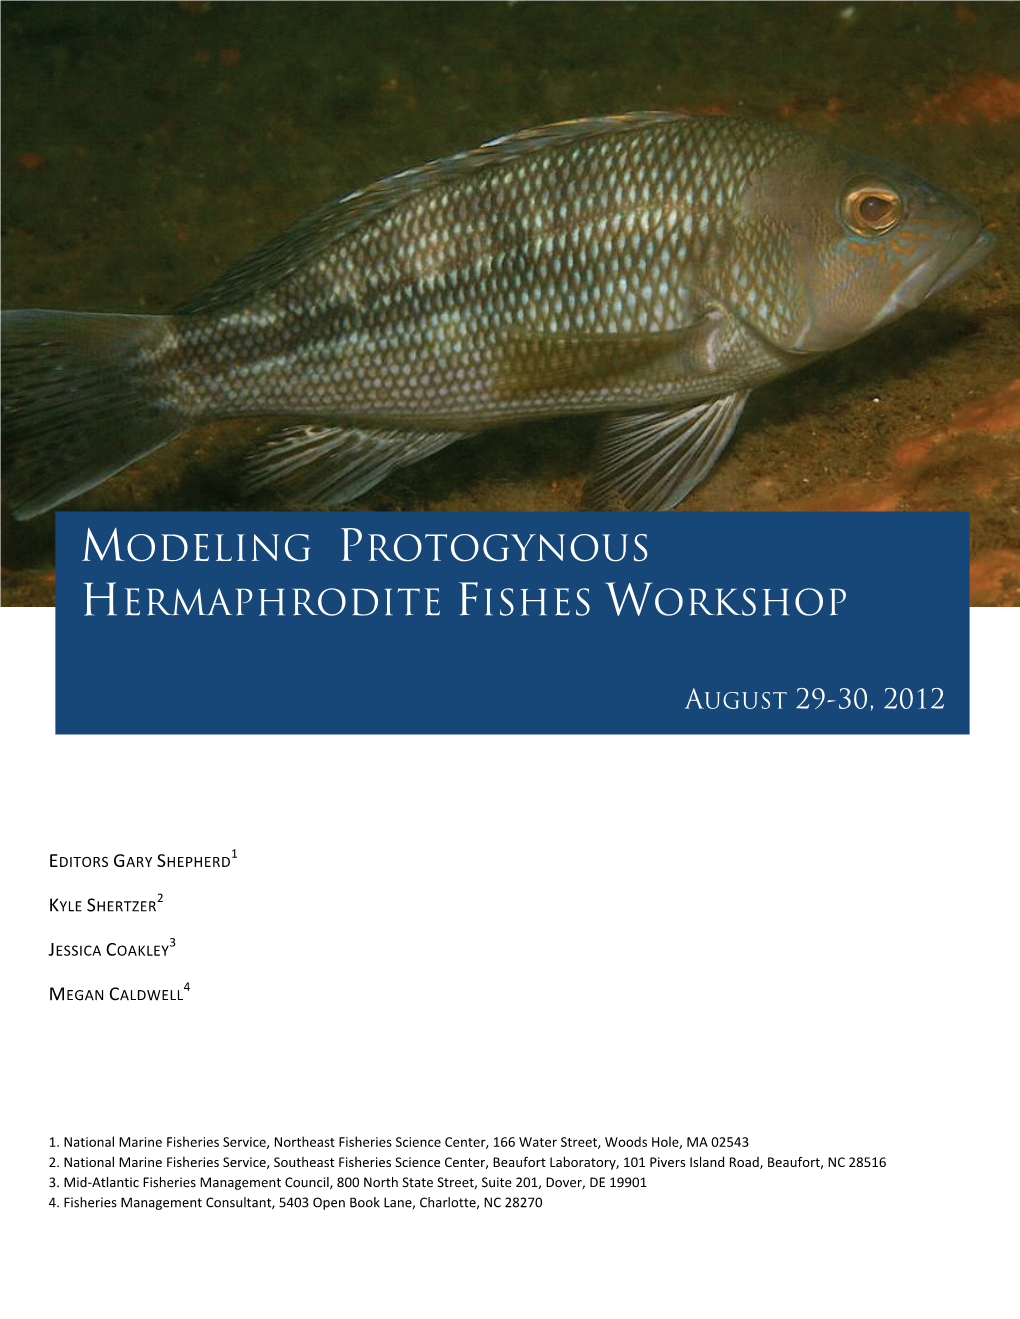 Modeling Protogynous Hermaphrodite Fishes, Raleigh, NC